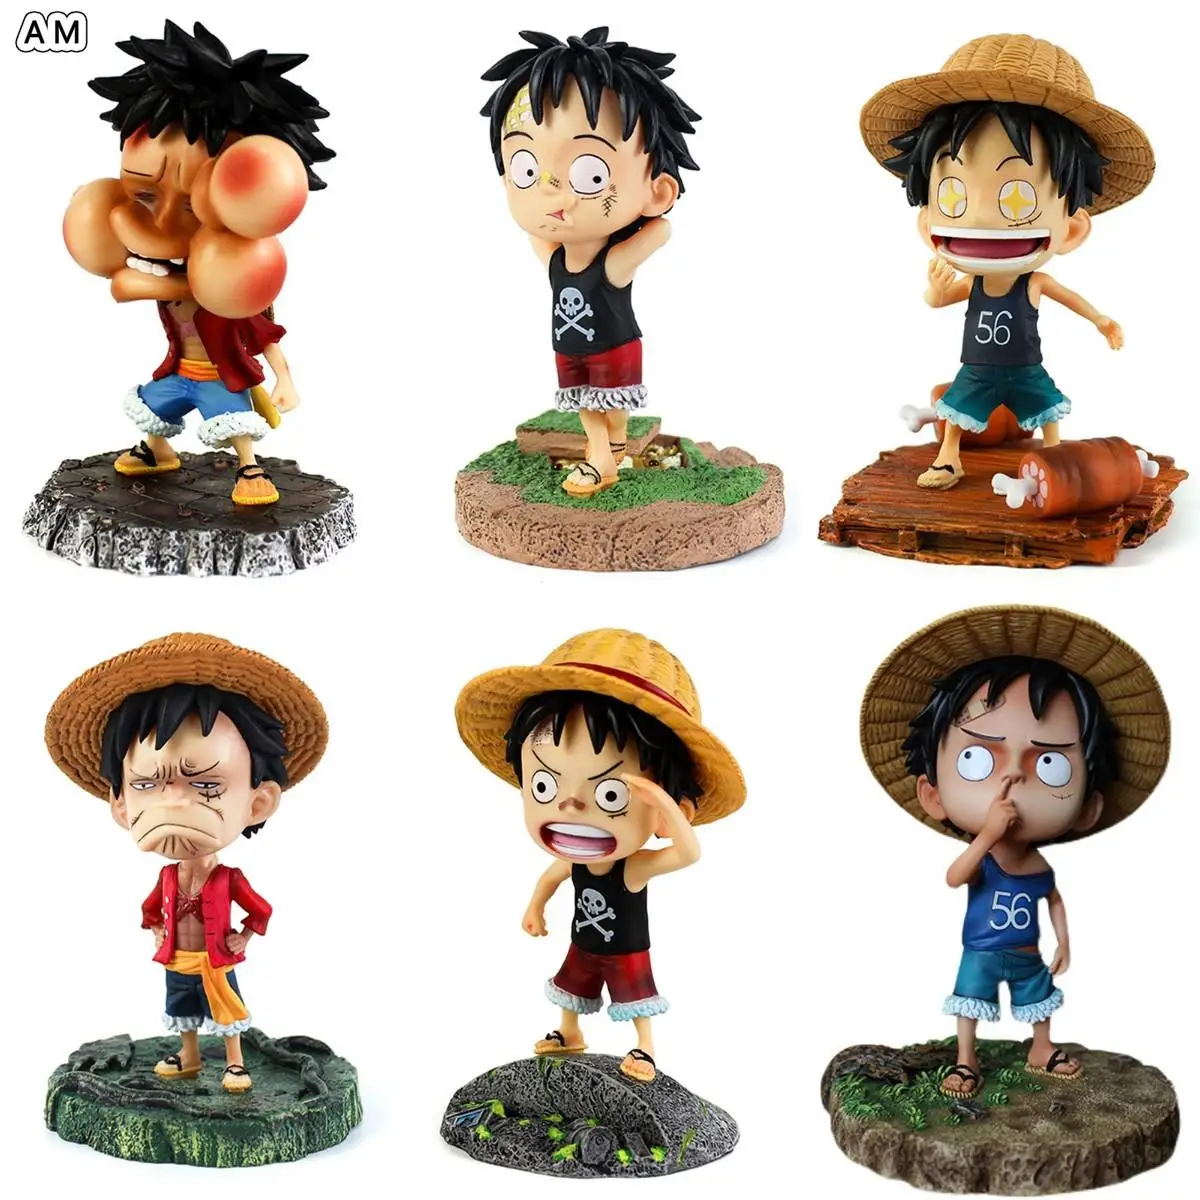 

15CM Anime One Piece Action Figure Monkey D Luffy Childhood Funny Q Version Young Luff Figurine Pvc Collectible Model Toy Gift